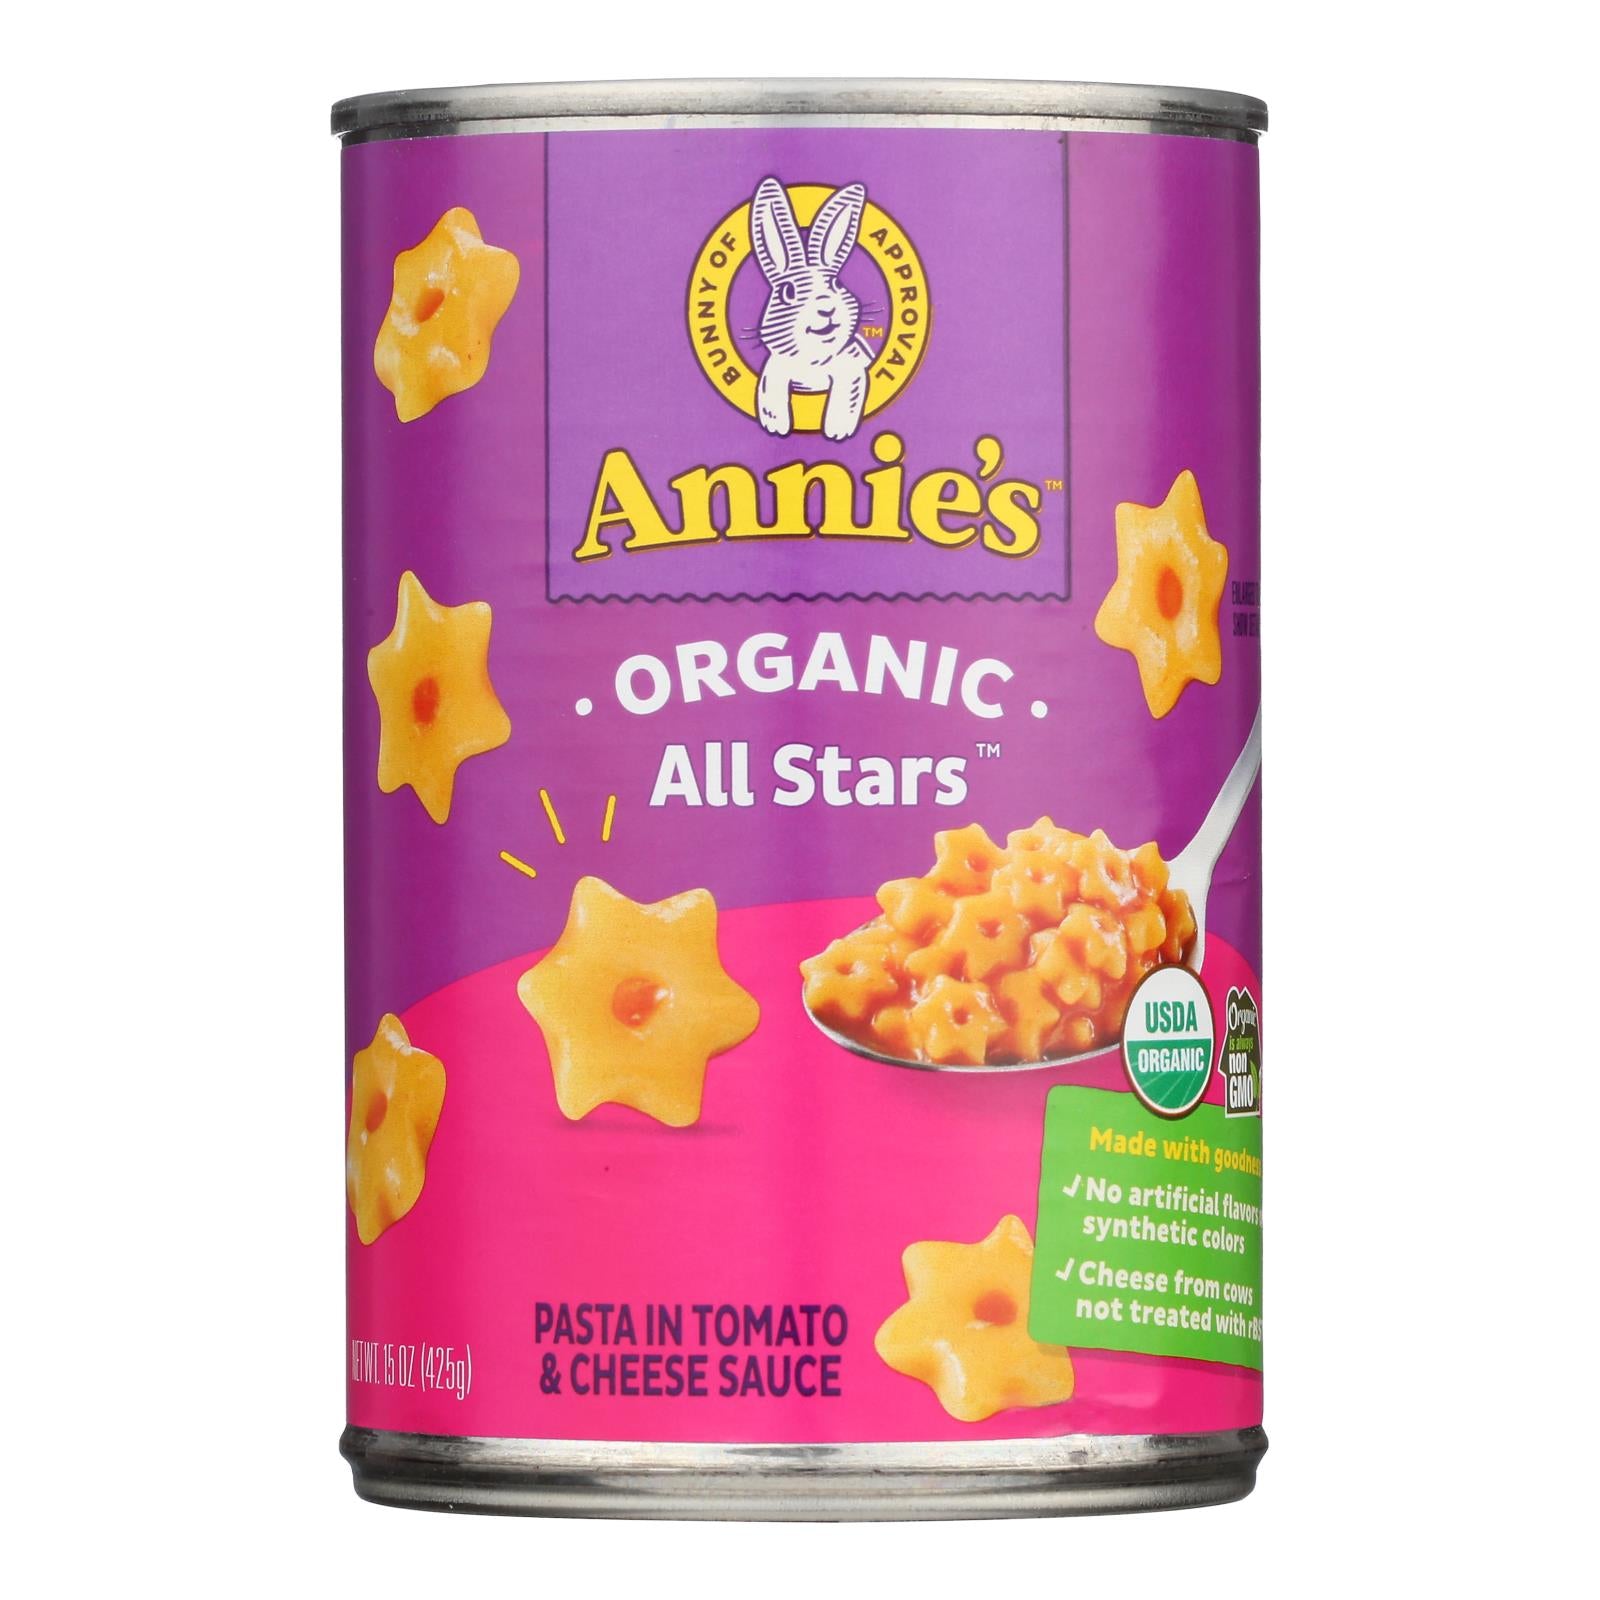 Annie's Homegrown Organic All Stars Pasta In Tomato And Cheese Sauce - Case Of 12 - 15 Oz.